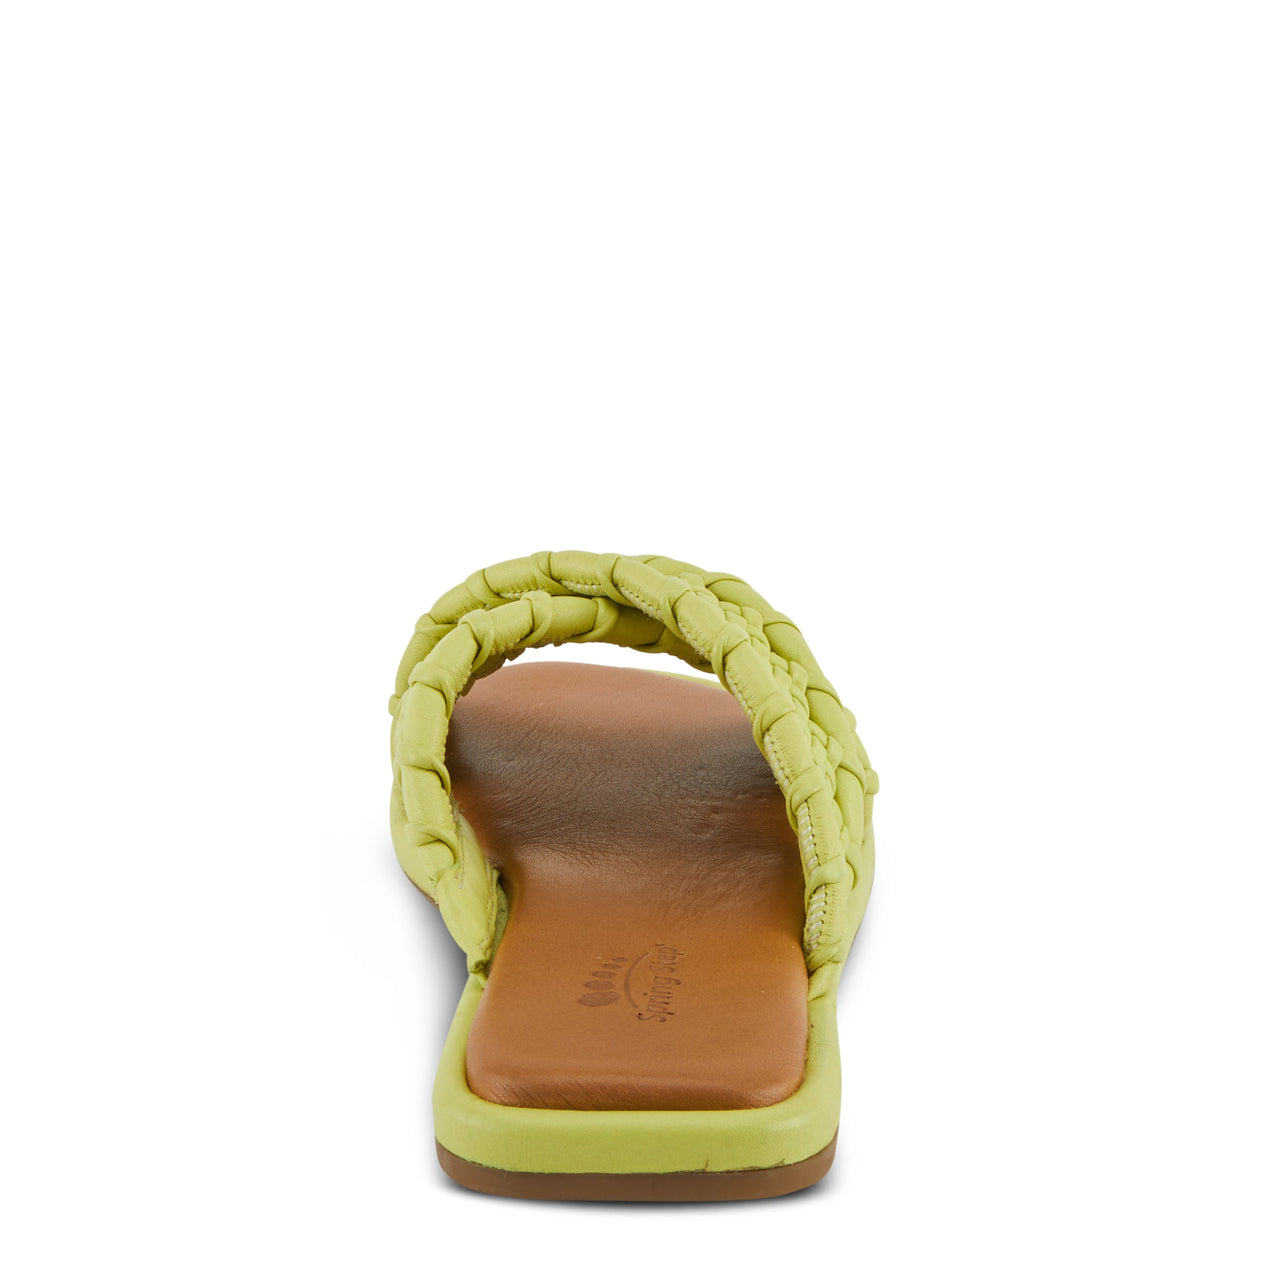 Spring Step Montauk Sandals - stylish and comfortable leather sandals for women